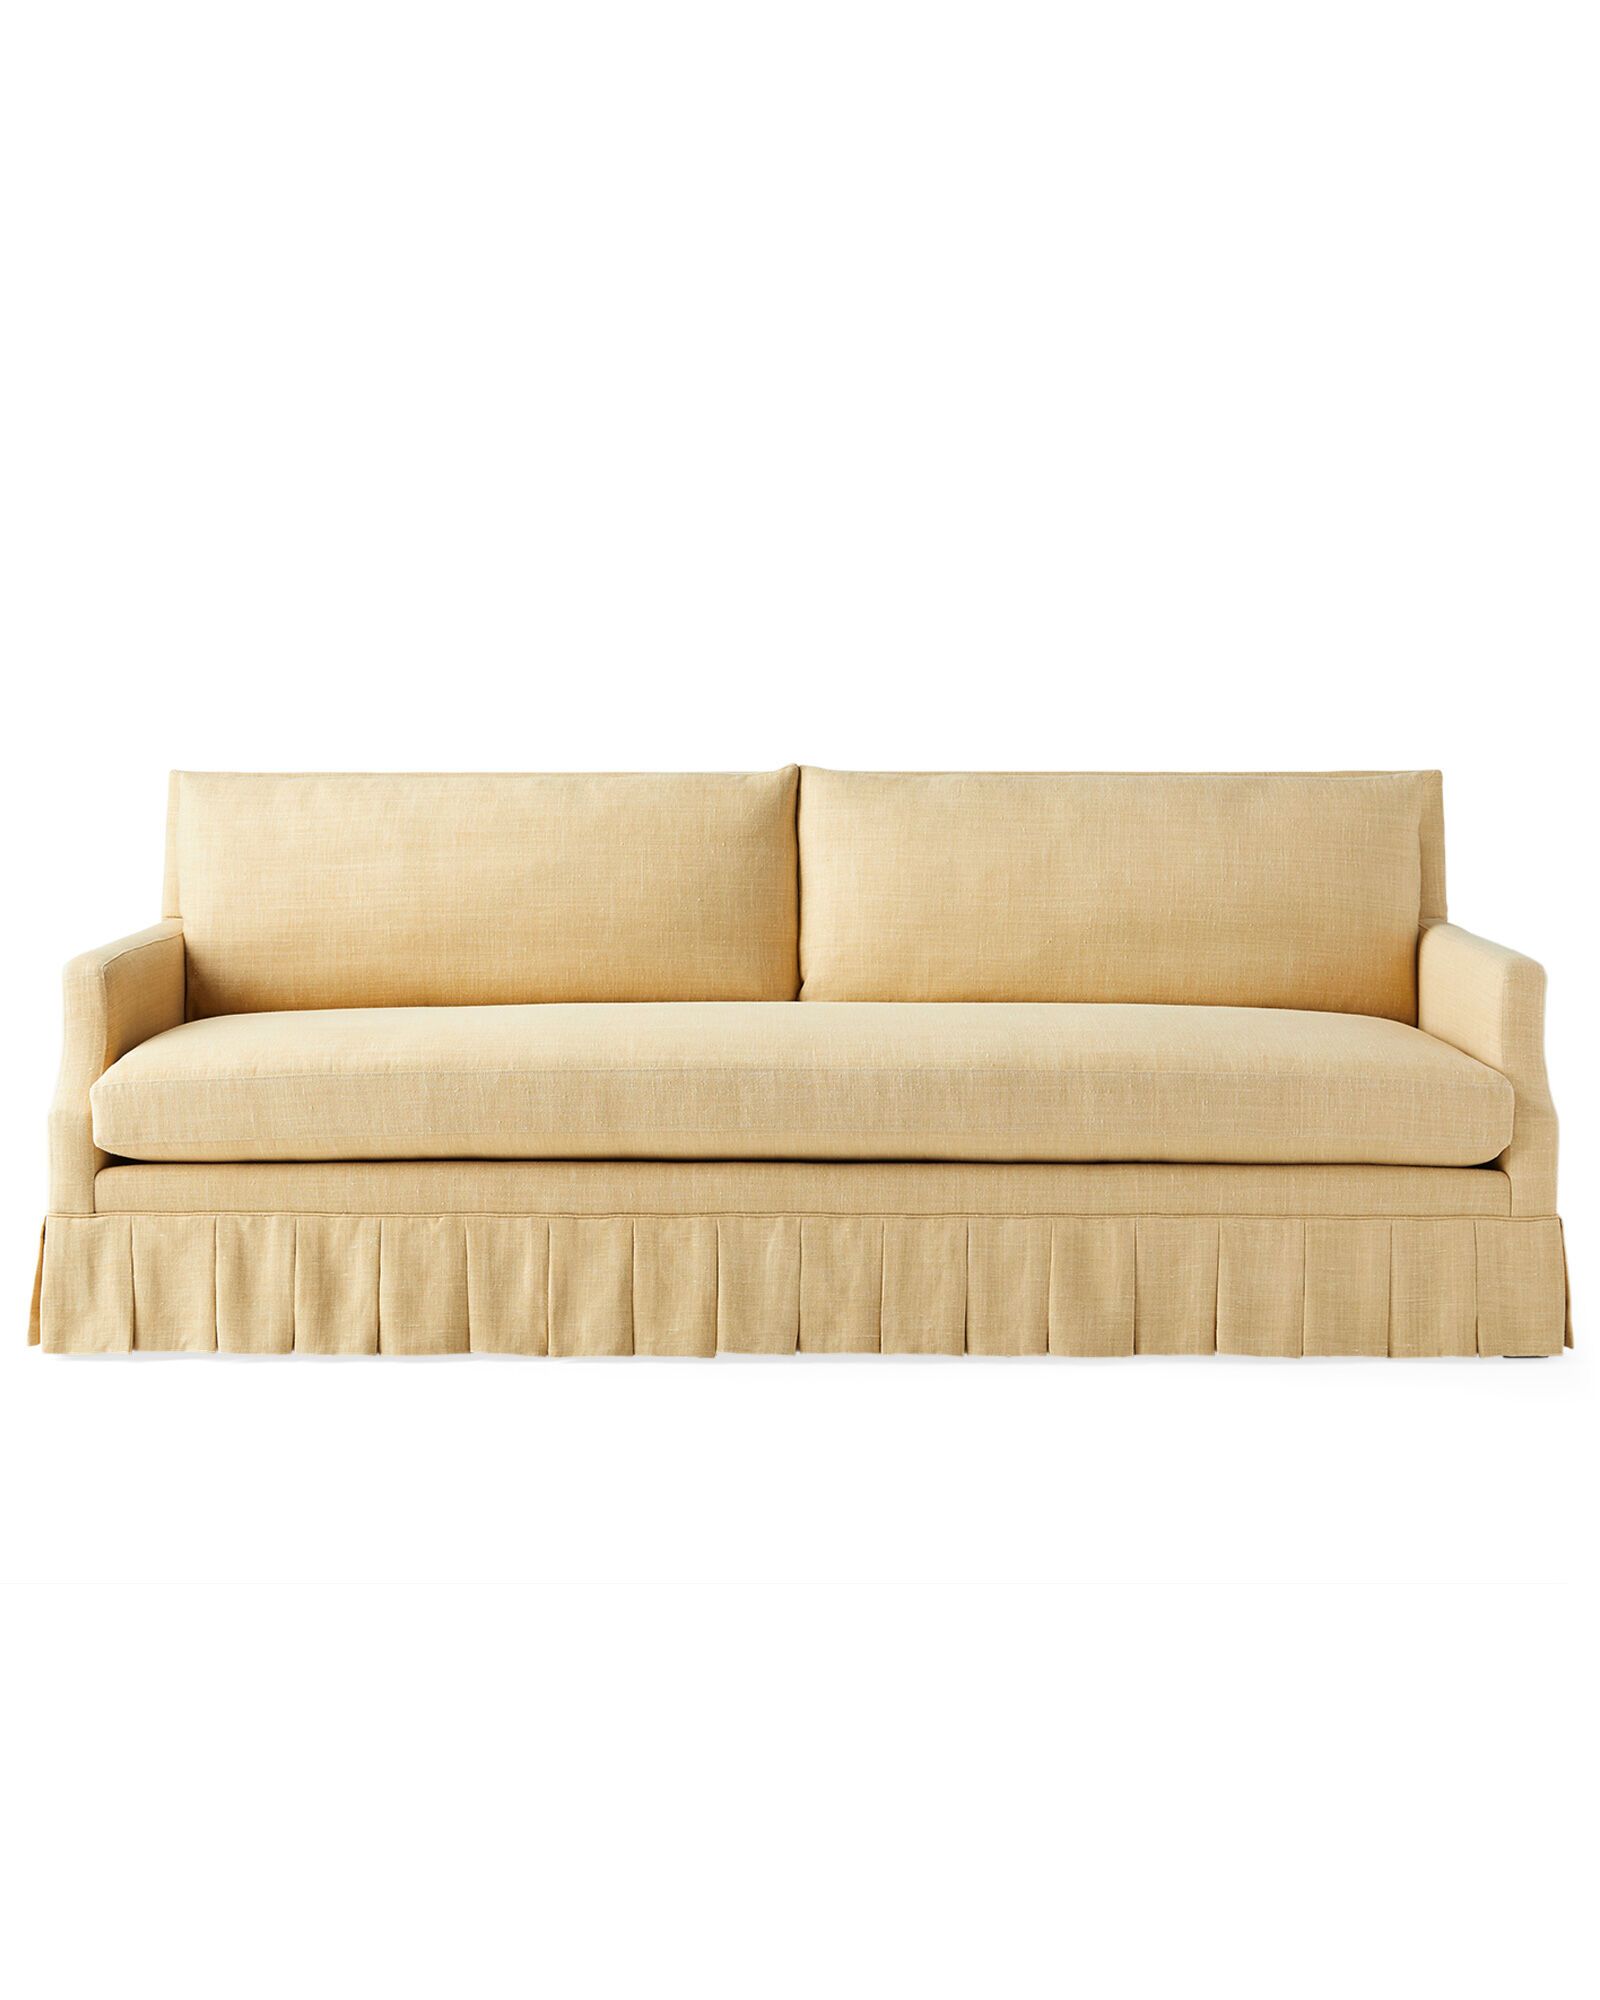 Grady Pleated Sofa in Wheat Washed Linen | Serena and Lily